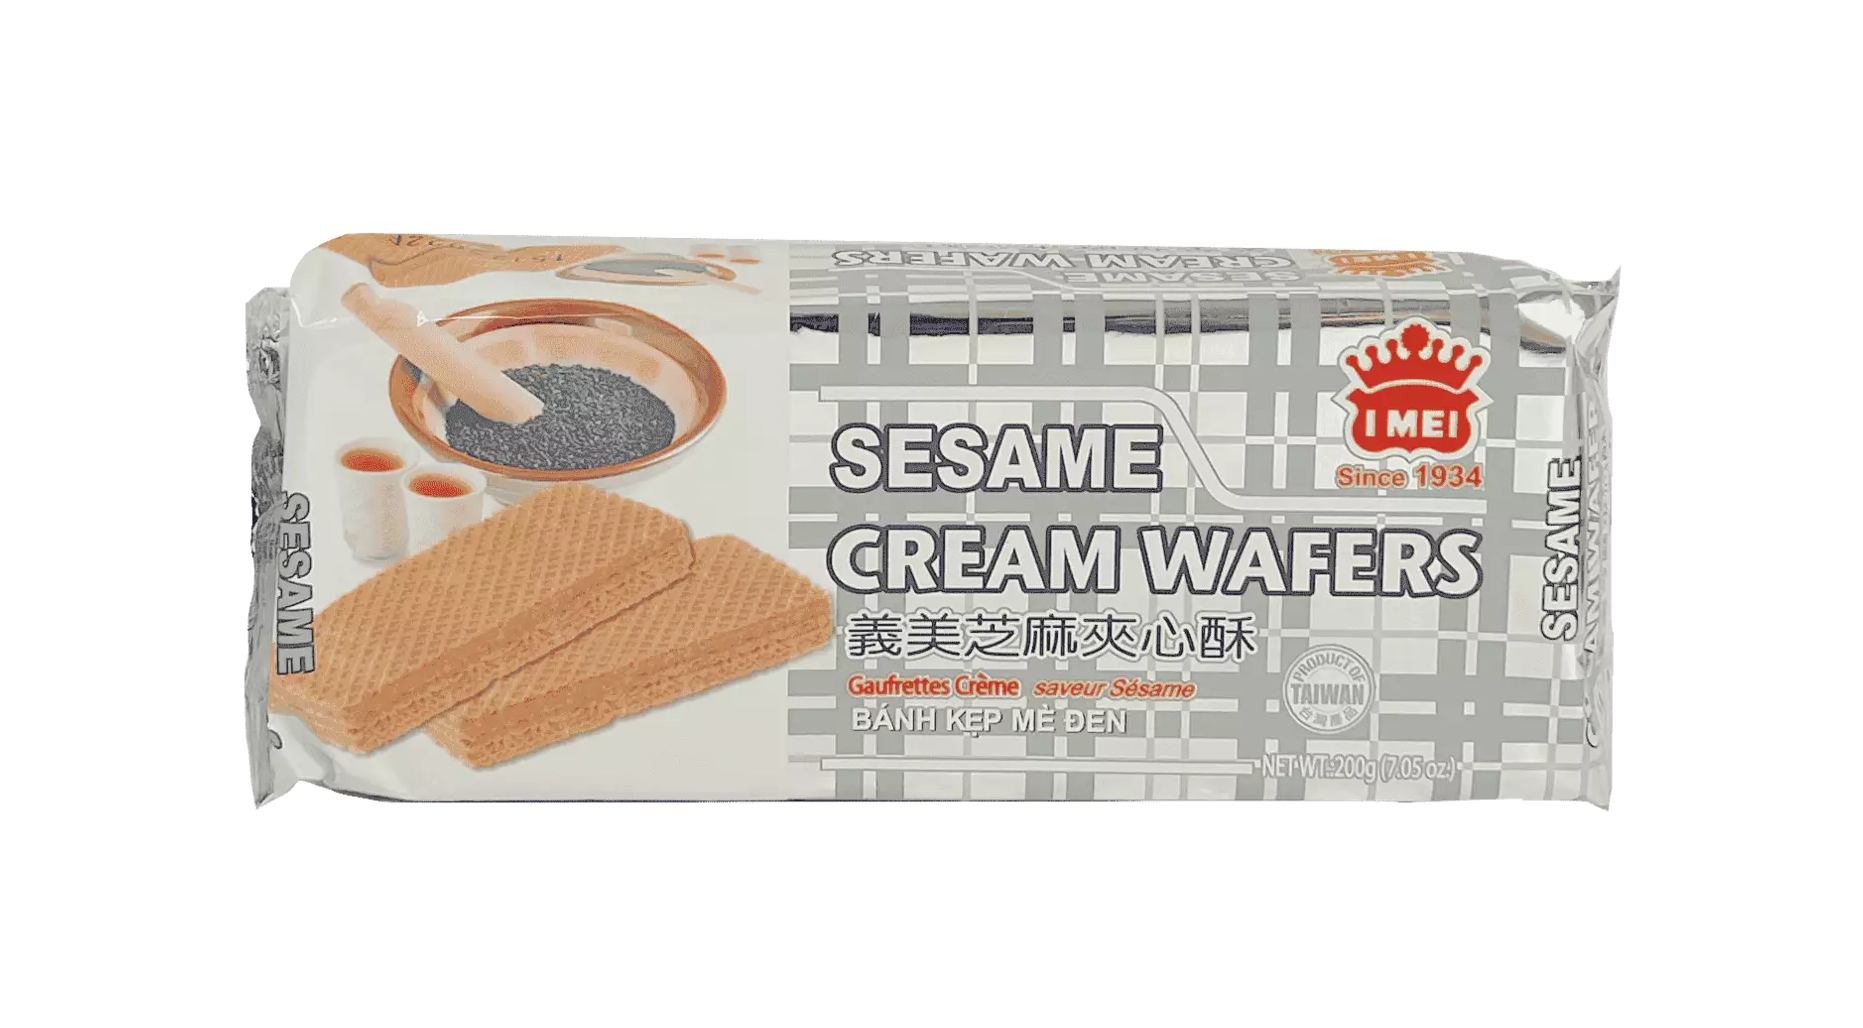 Cream Wafer With Sesame Flavour 200g I Mei Taiwan